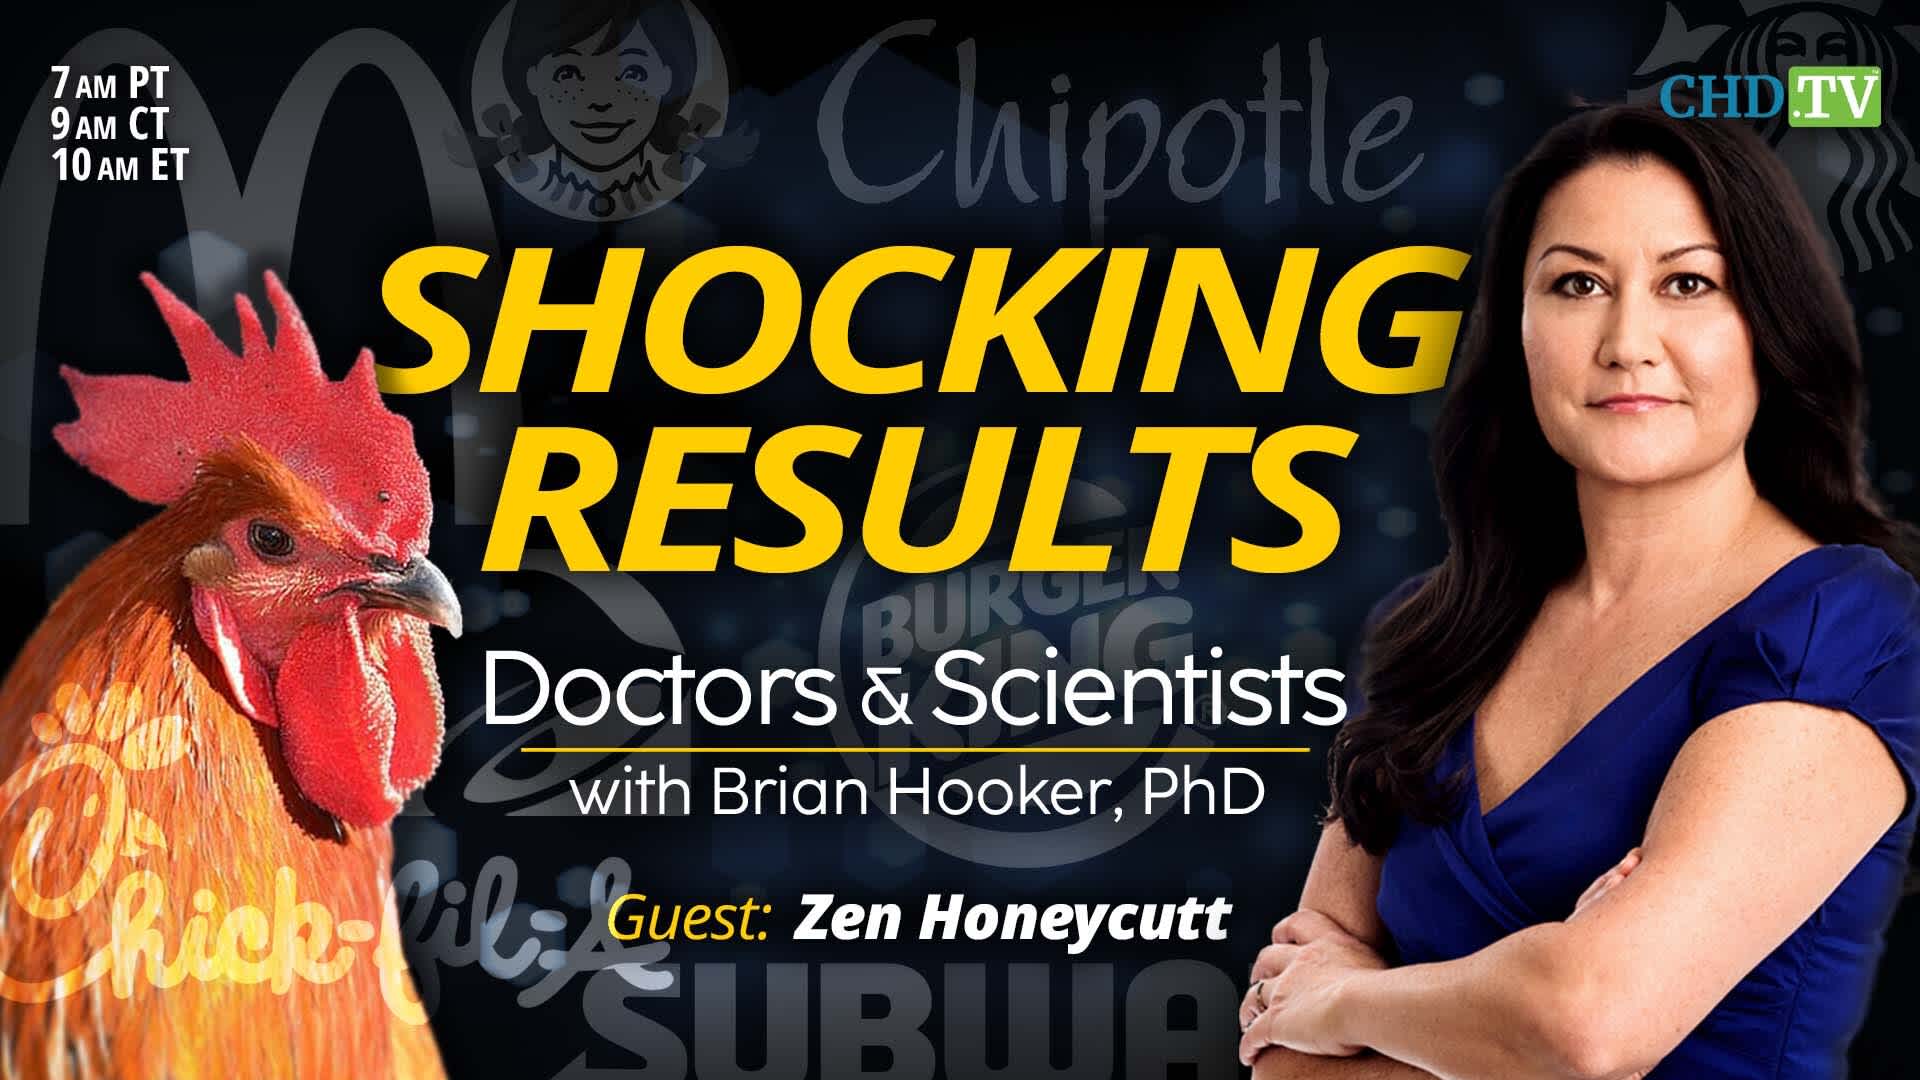 ‘Shocking’ Fast Food Testing Results With Zen Honeycutt